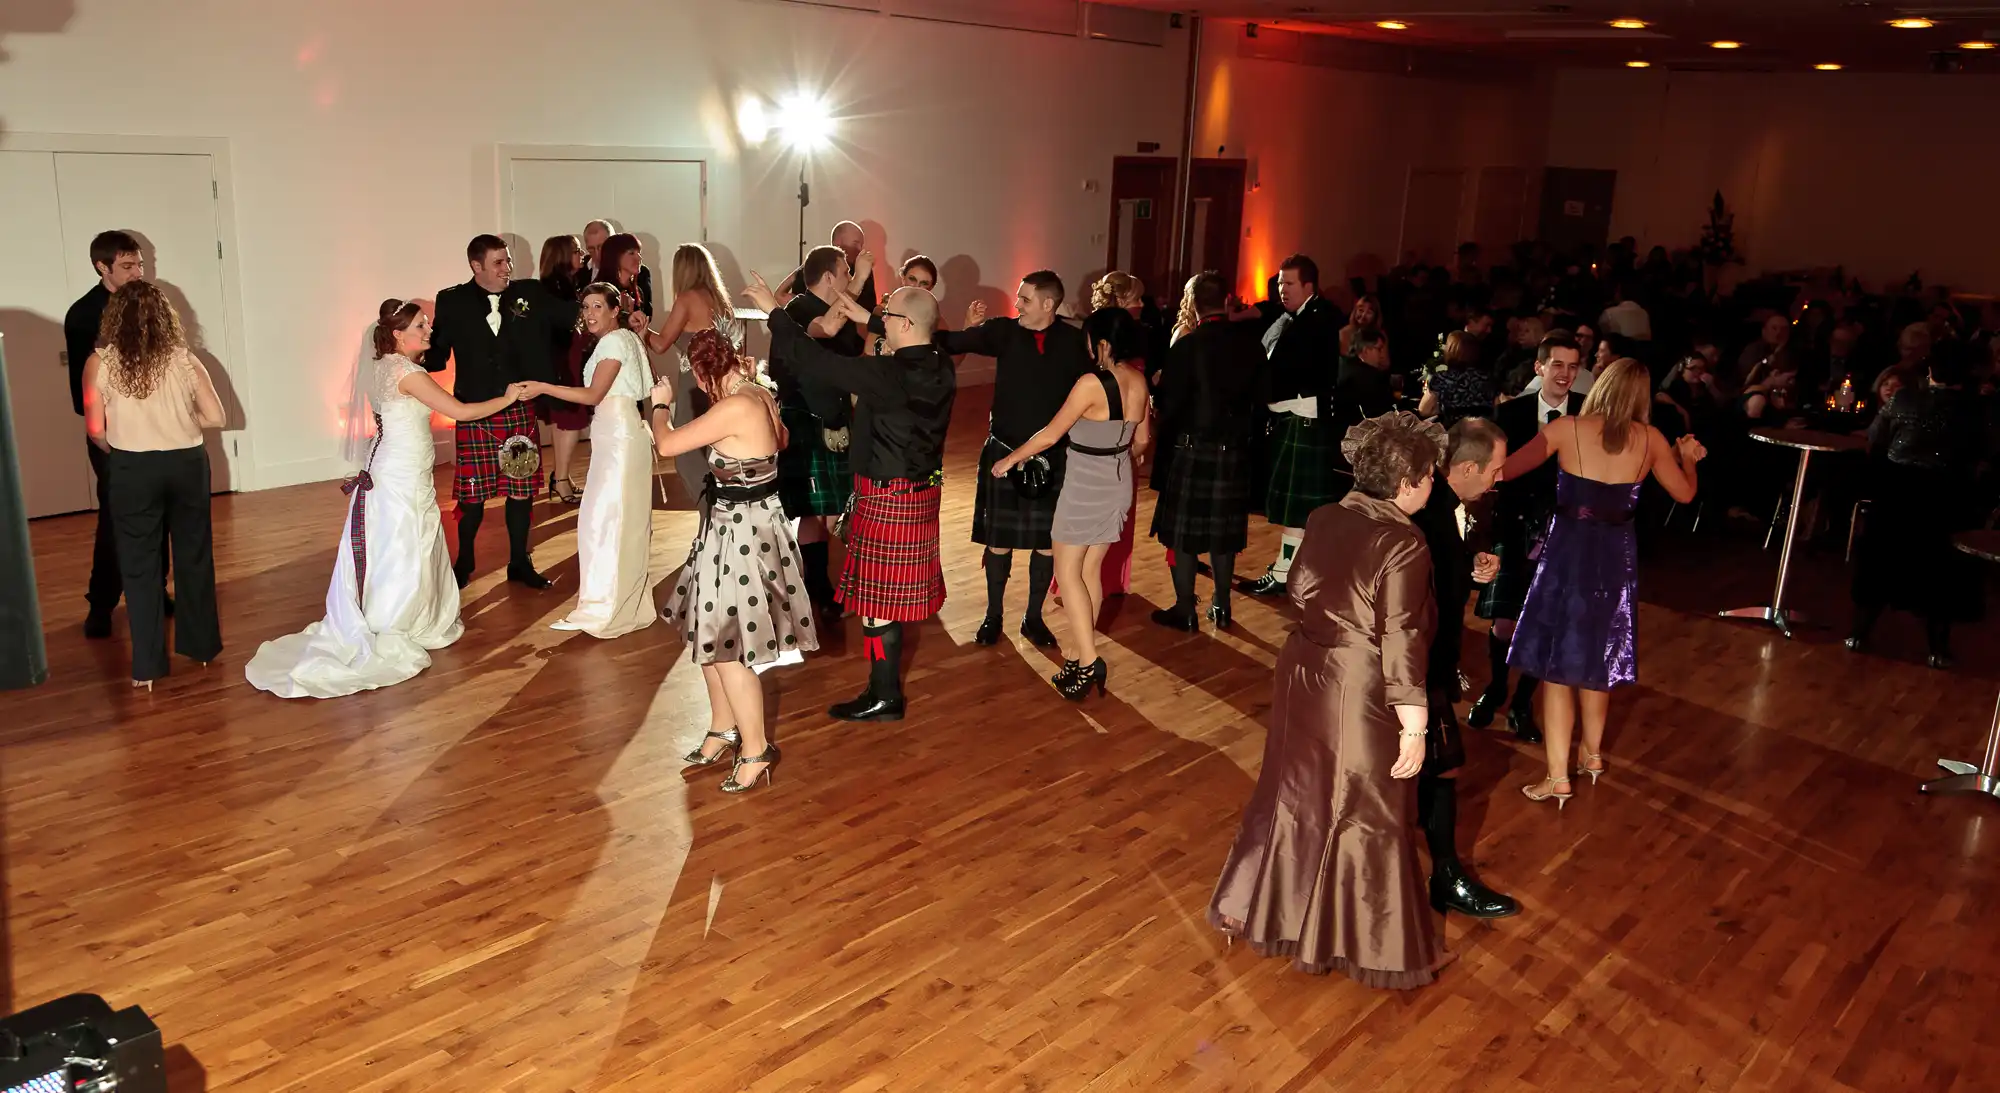 People in formal attire, some wearing kilts, dancing and socializing at a lively indoor gathering.